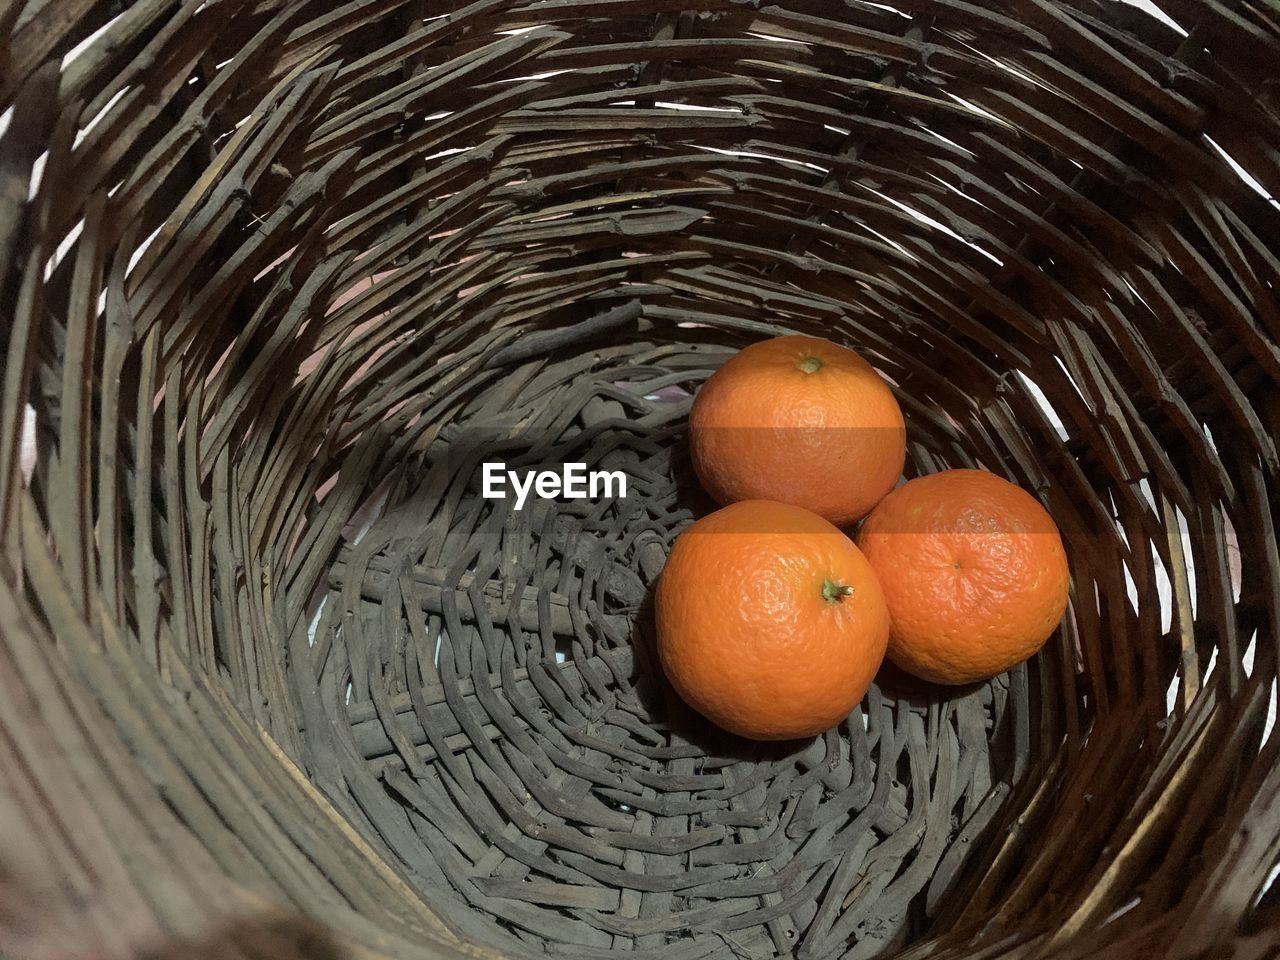 HIGH ANGLE VIEW OF ORANGES IN BASKET